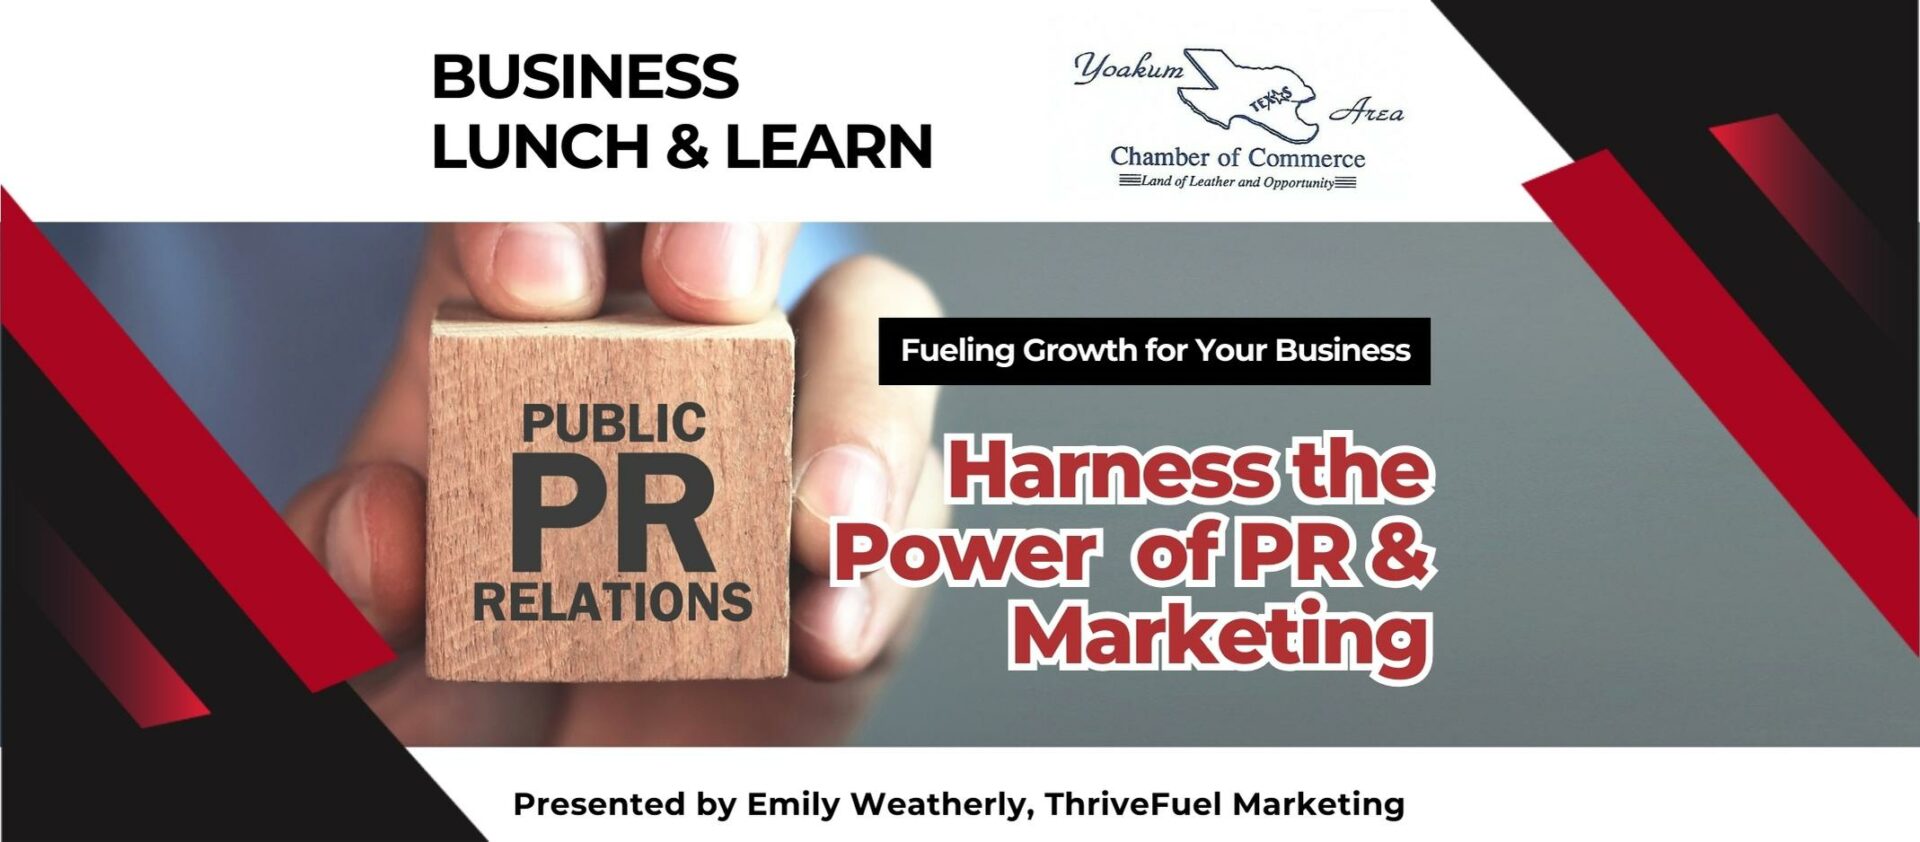 Yoakum Chamber Lunch and Learn on Sept. 27th; ThriveFuel Marketing to Empower Area Businesses with Strategic PR and Marketing Insights